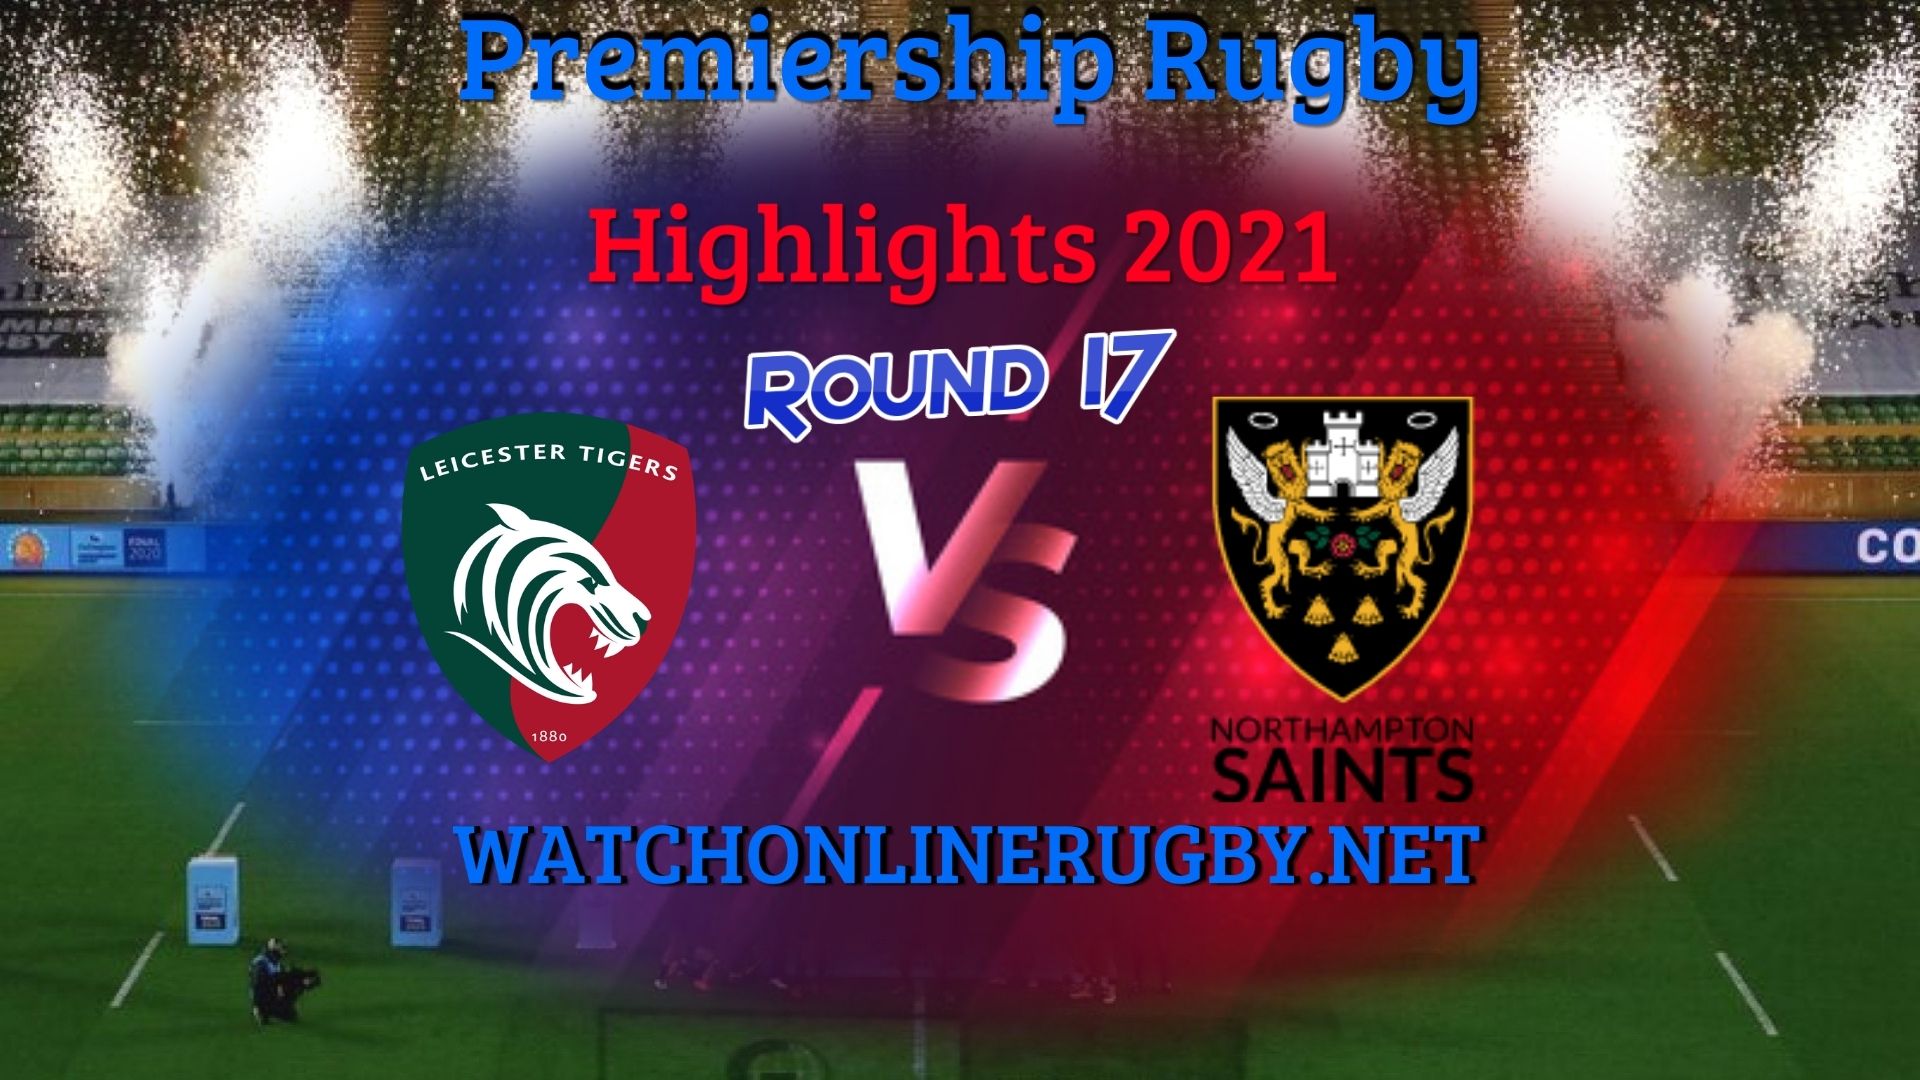 Leicester Tigers Vs Northampton Saints Premiership Rugby 2021 RD 17